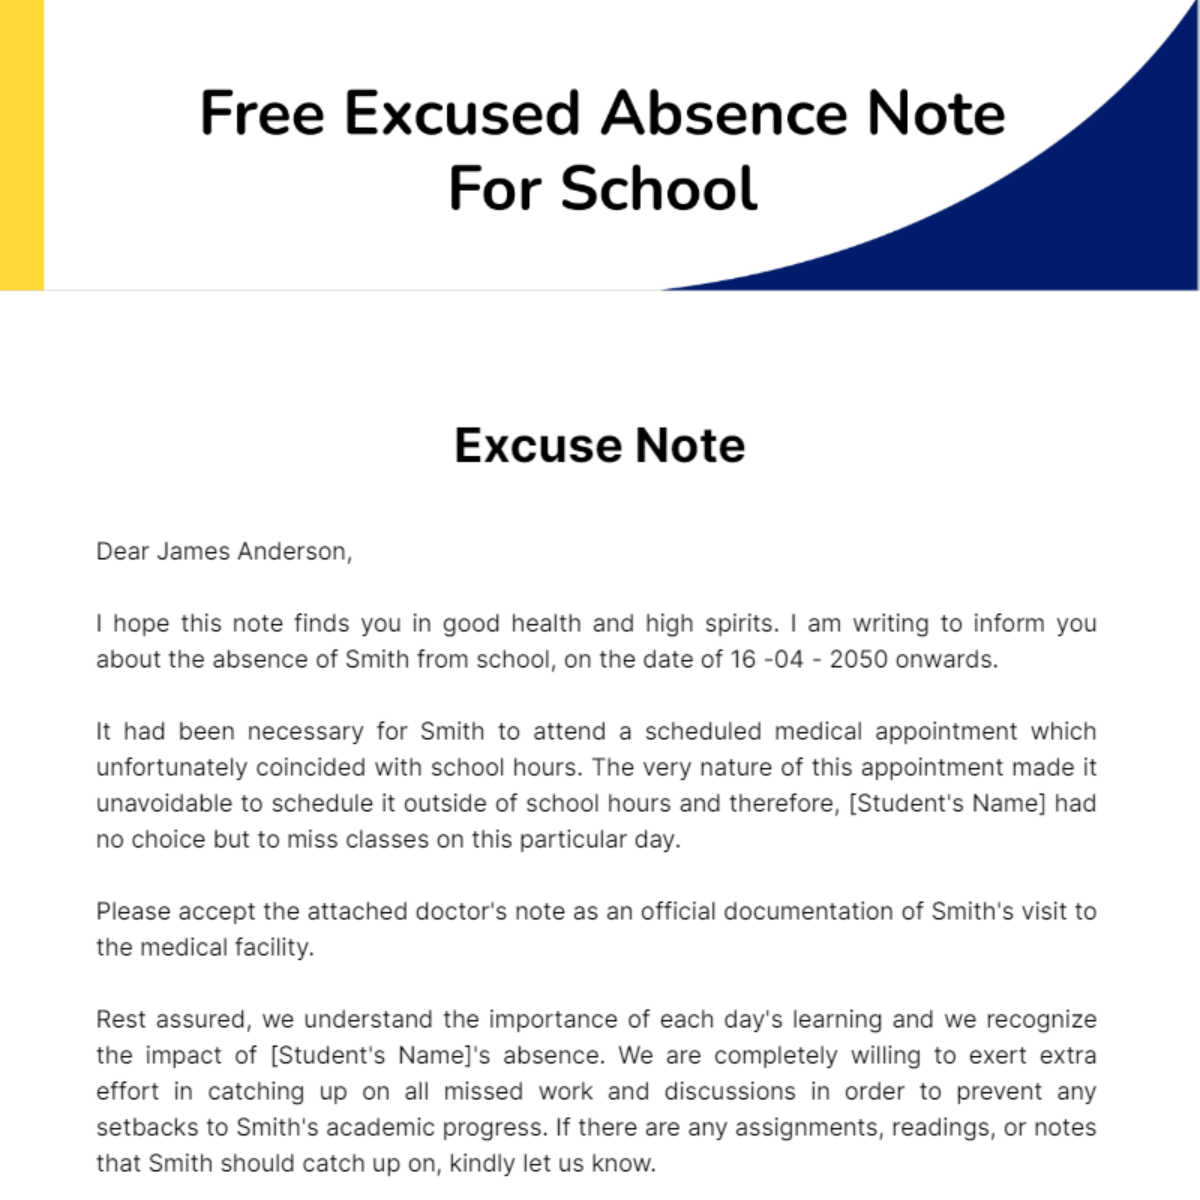 Free Excused Absence Note For School Template